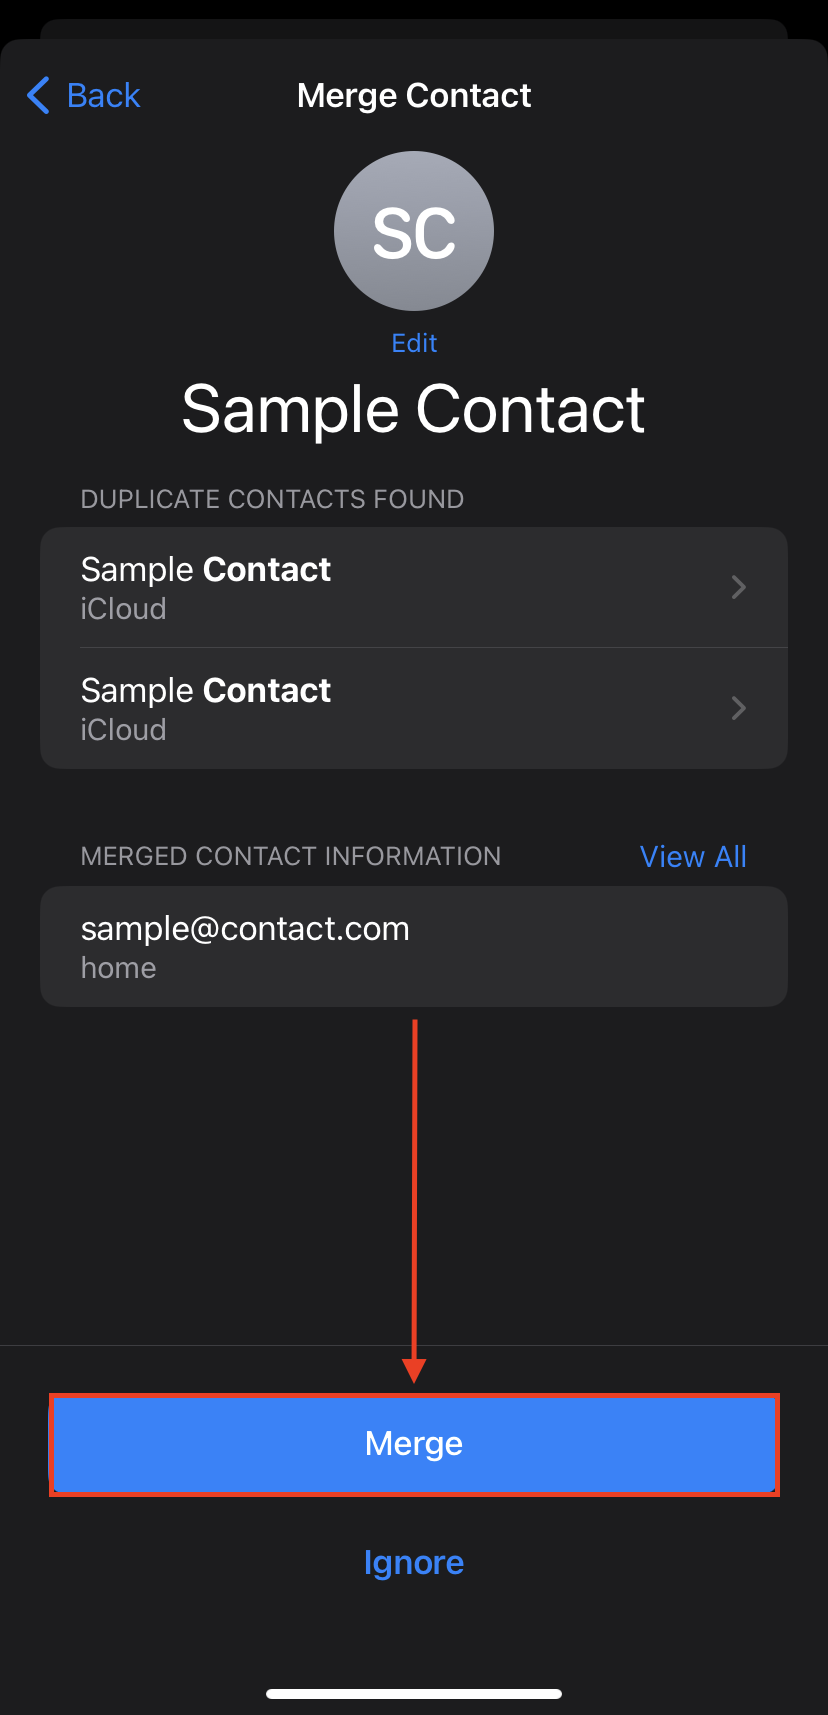 Merge user action in the iPhone's Contacts app